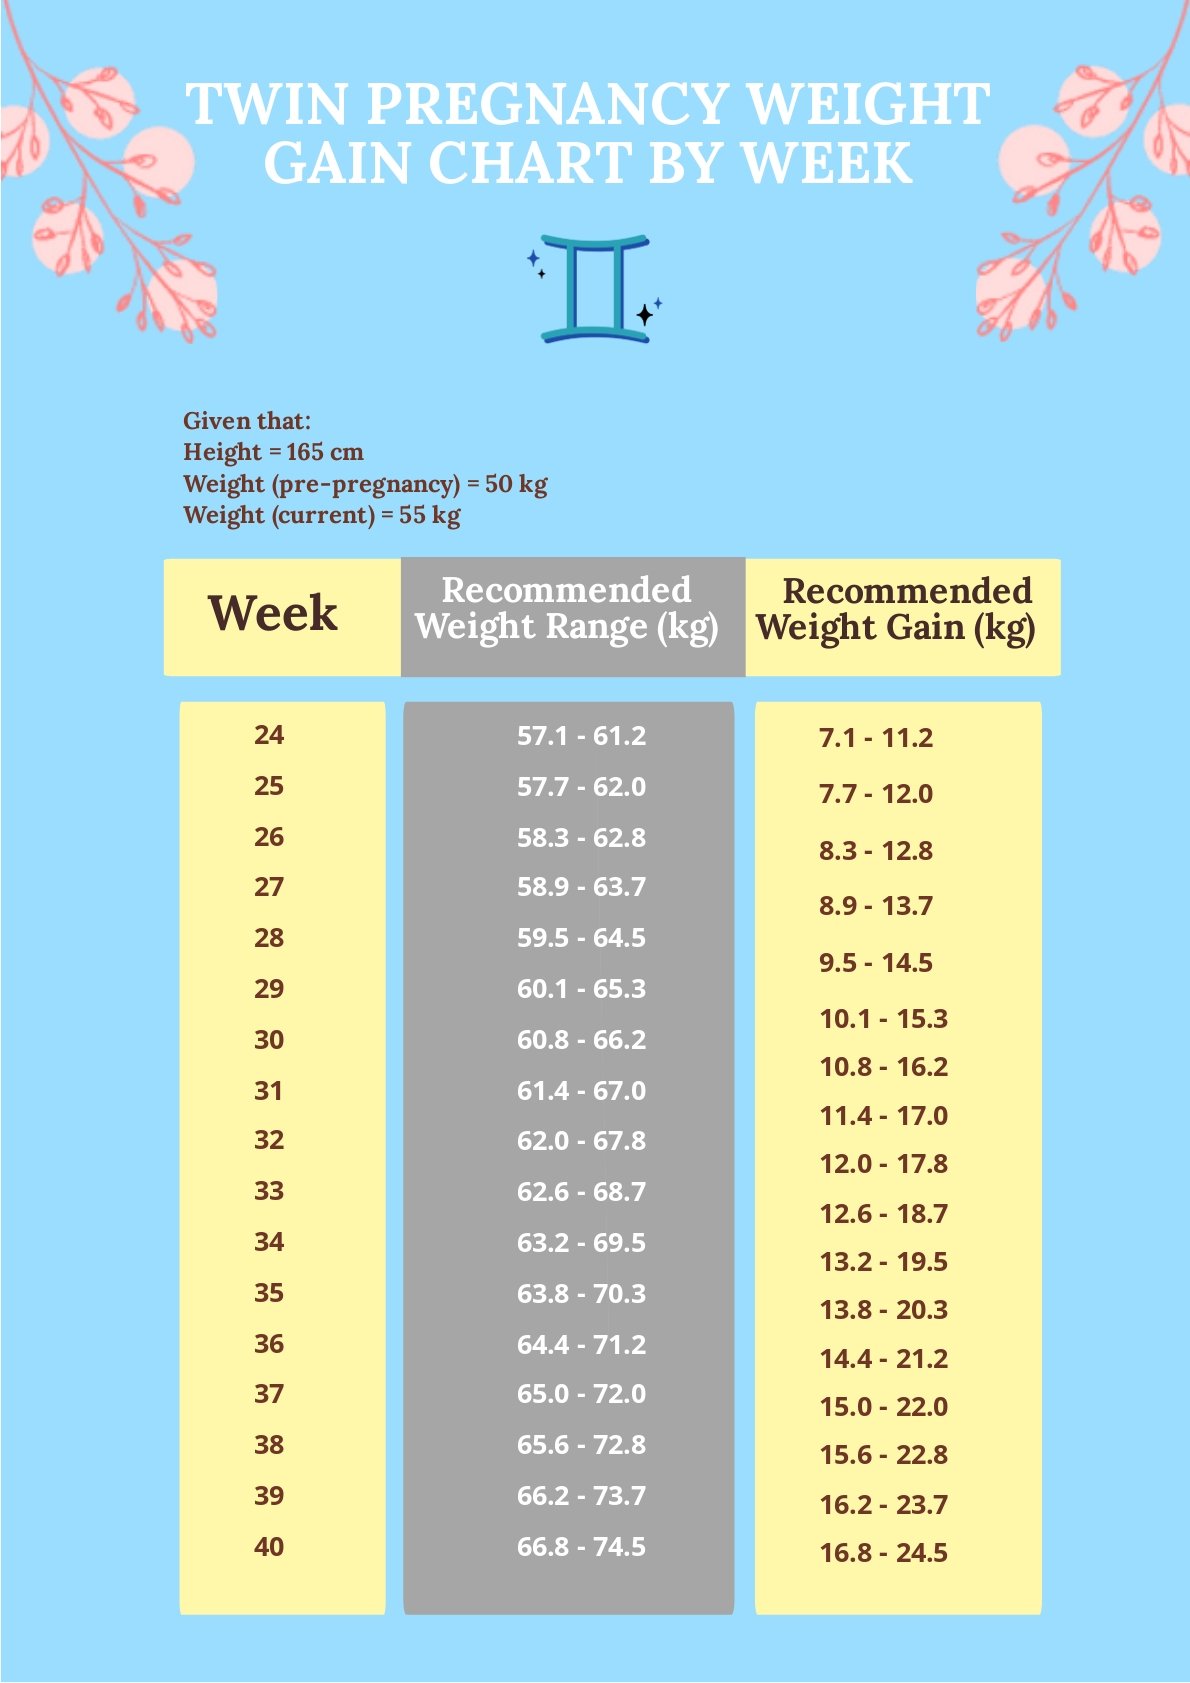 Twin Pregnancy Weight Gain Chart By Week in Word, PSD - Download ...